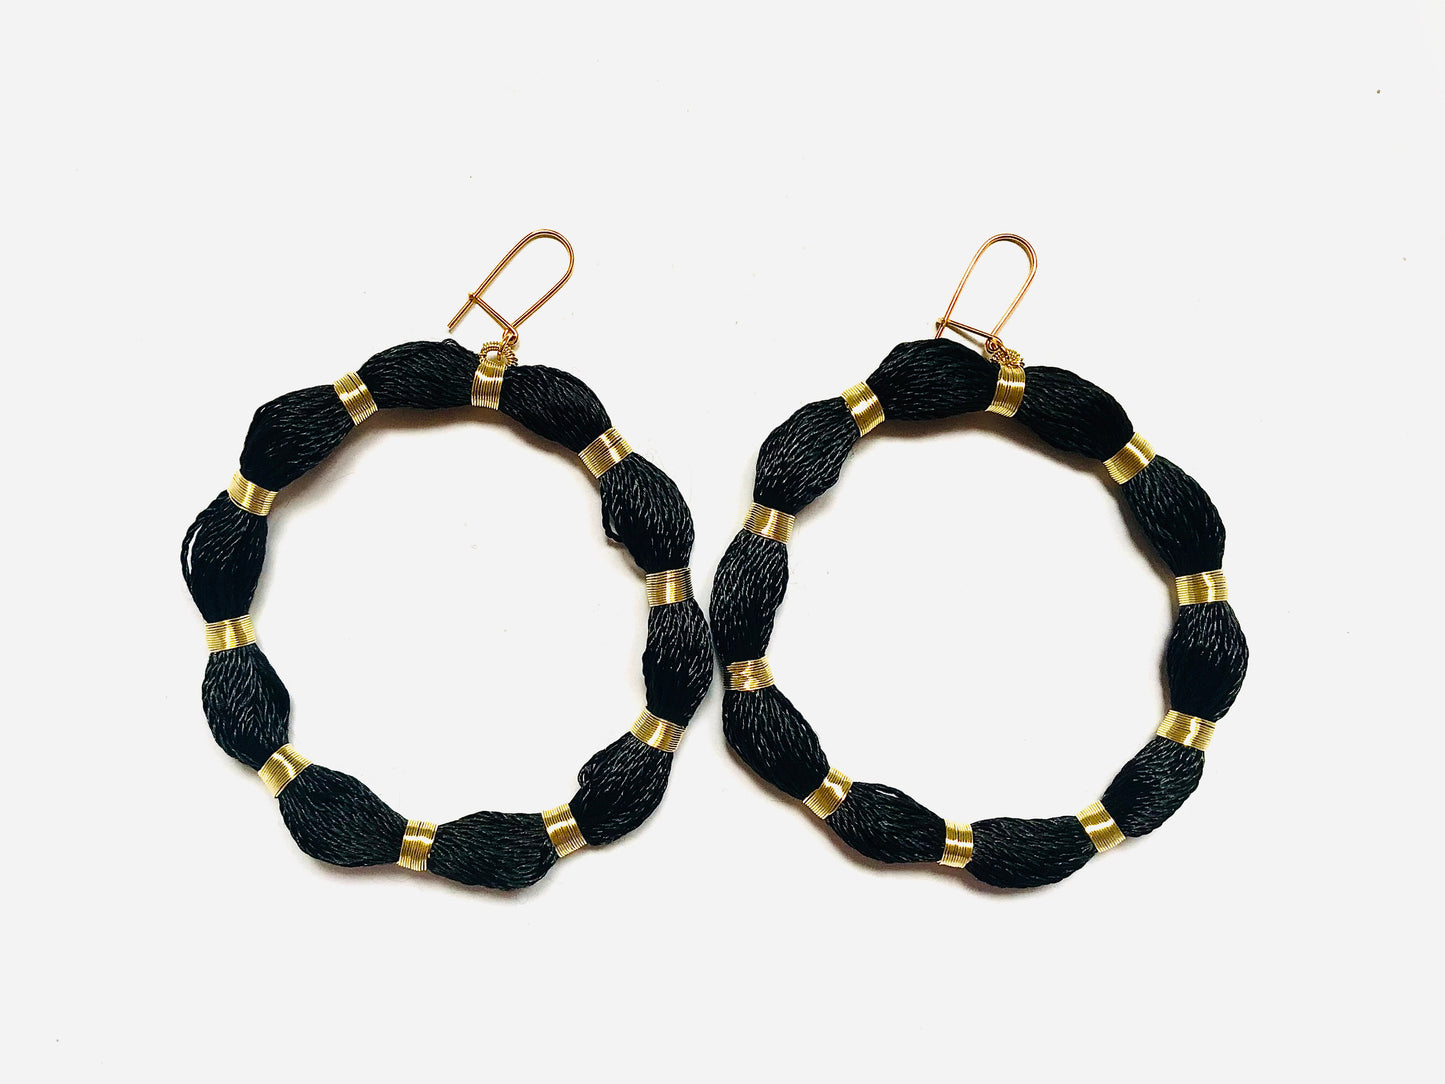 Notte Hoops, Venice Collection